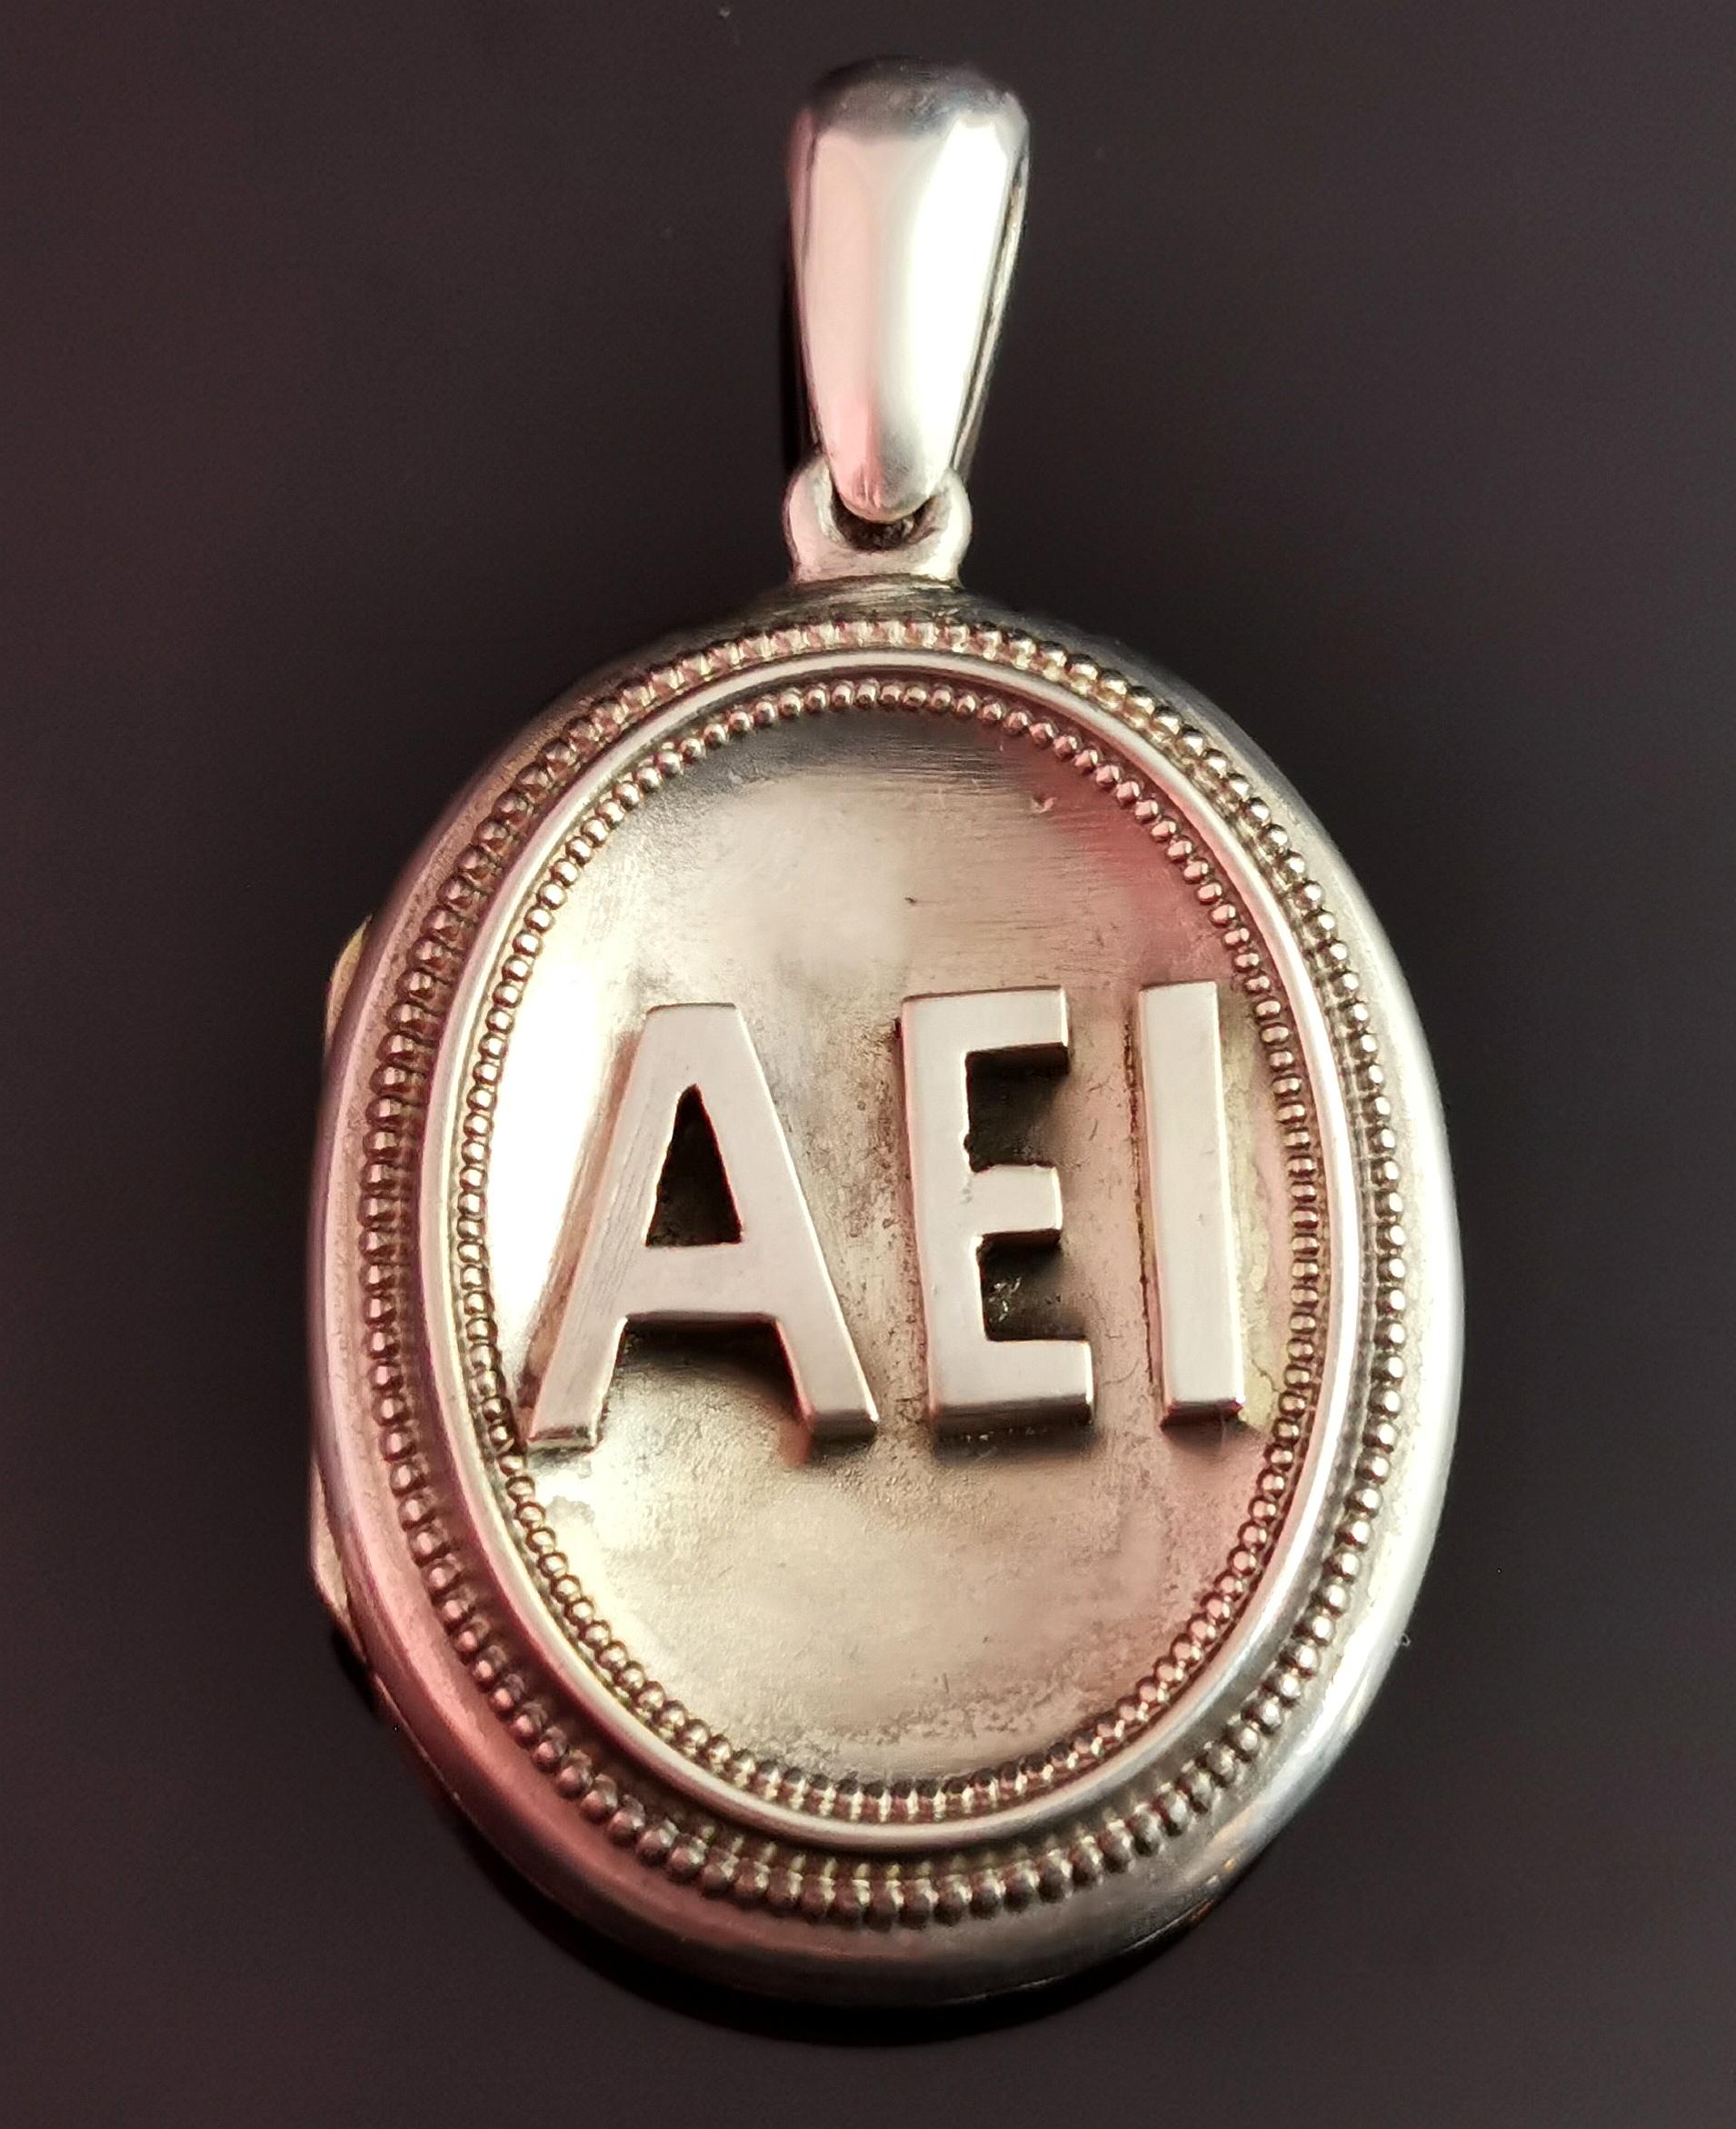 A stunning antique Victorian sterling silver AEI locket pendant.

This is a really unusual example, normally we see the letters in fancy or gothic script but this locket has these strong, chunky and bold applied letters giving a 3d effect.

It